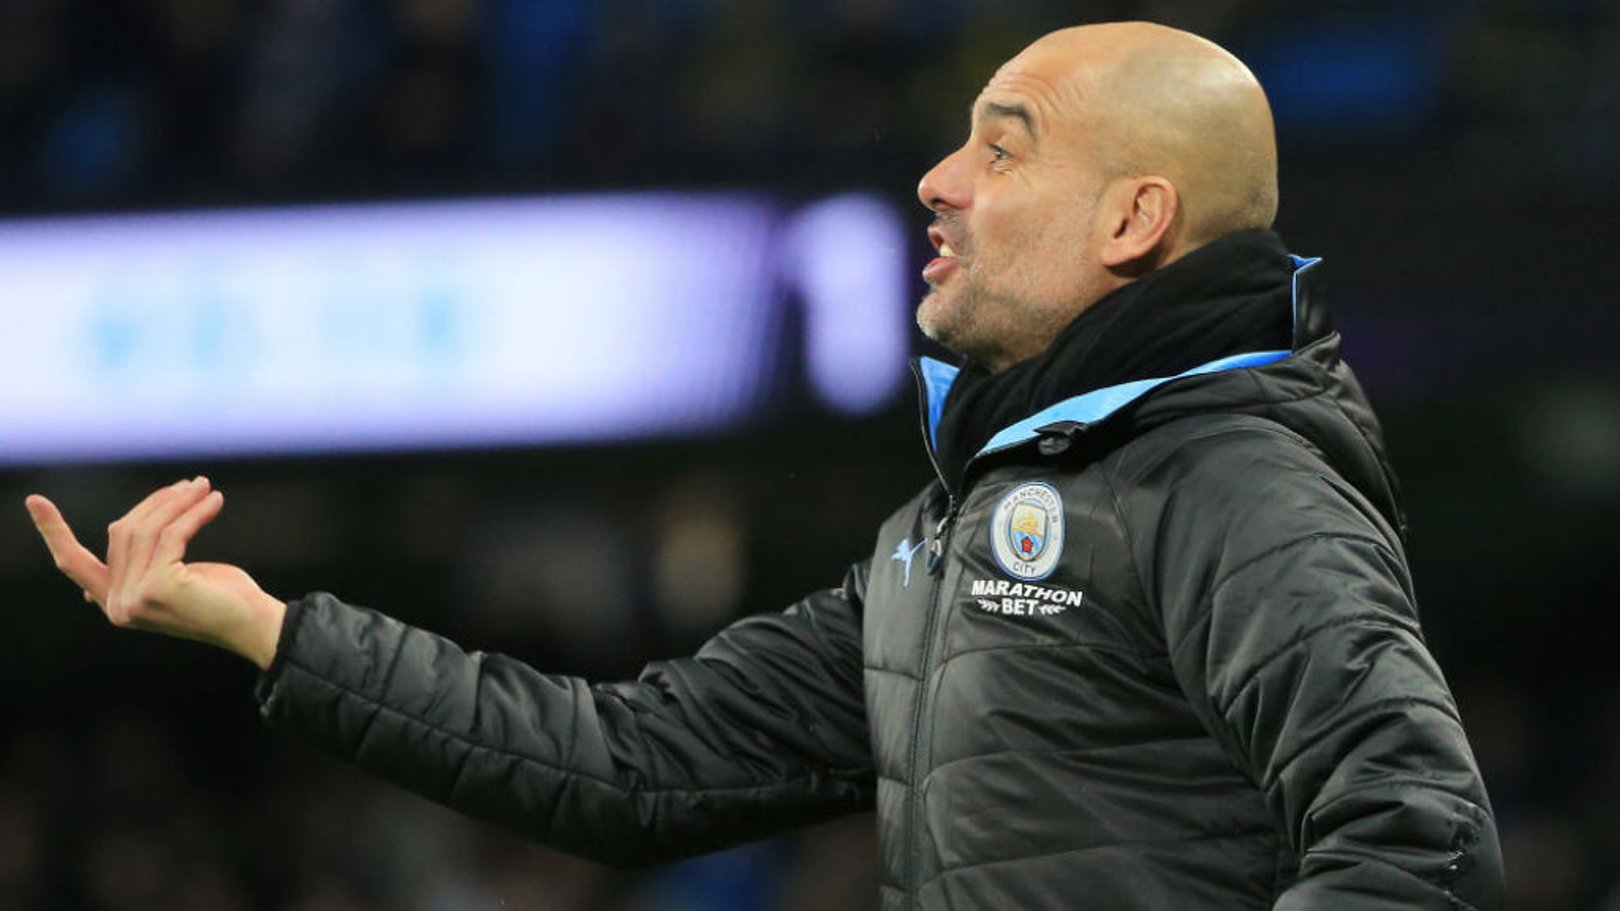 'We are happy to be in the next round' says Pep